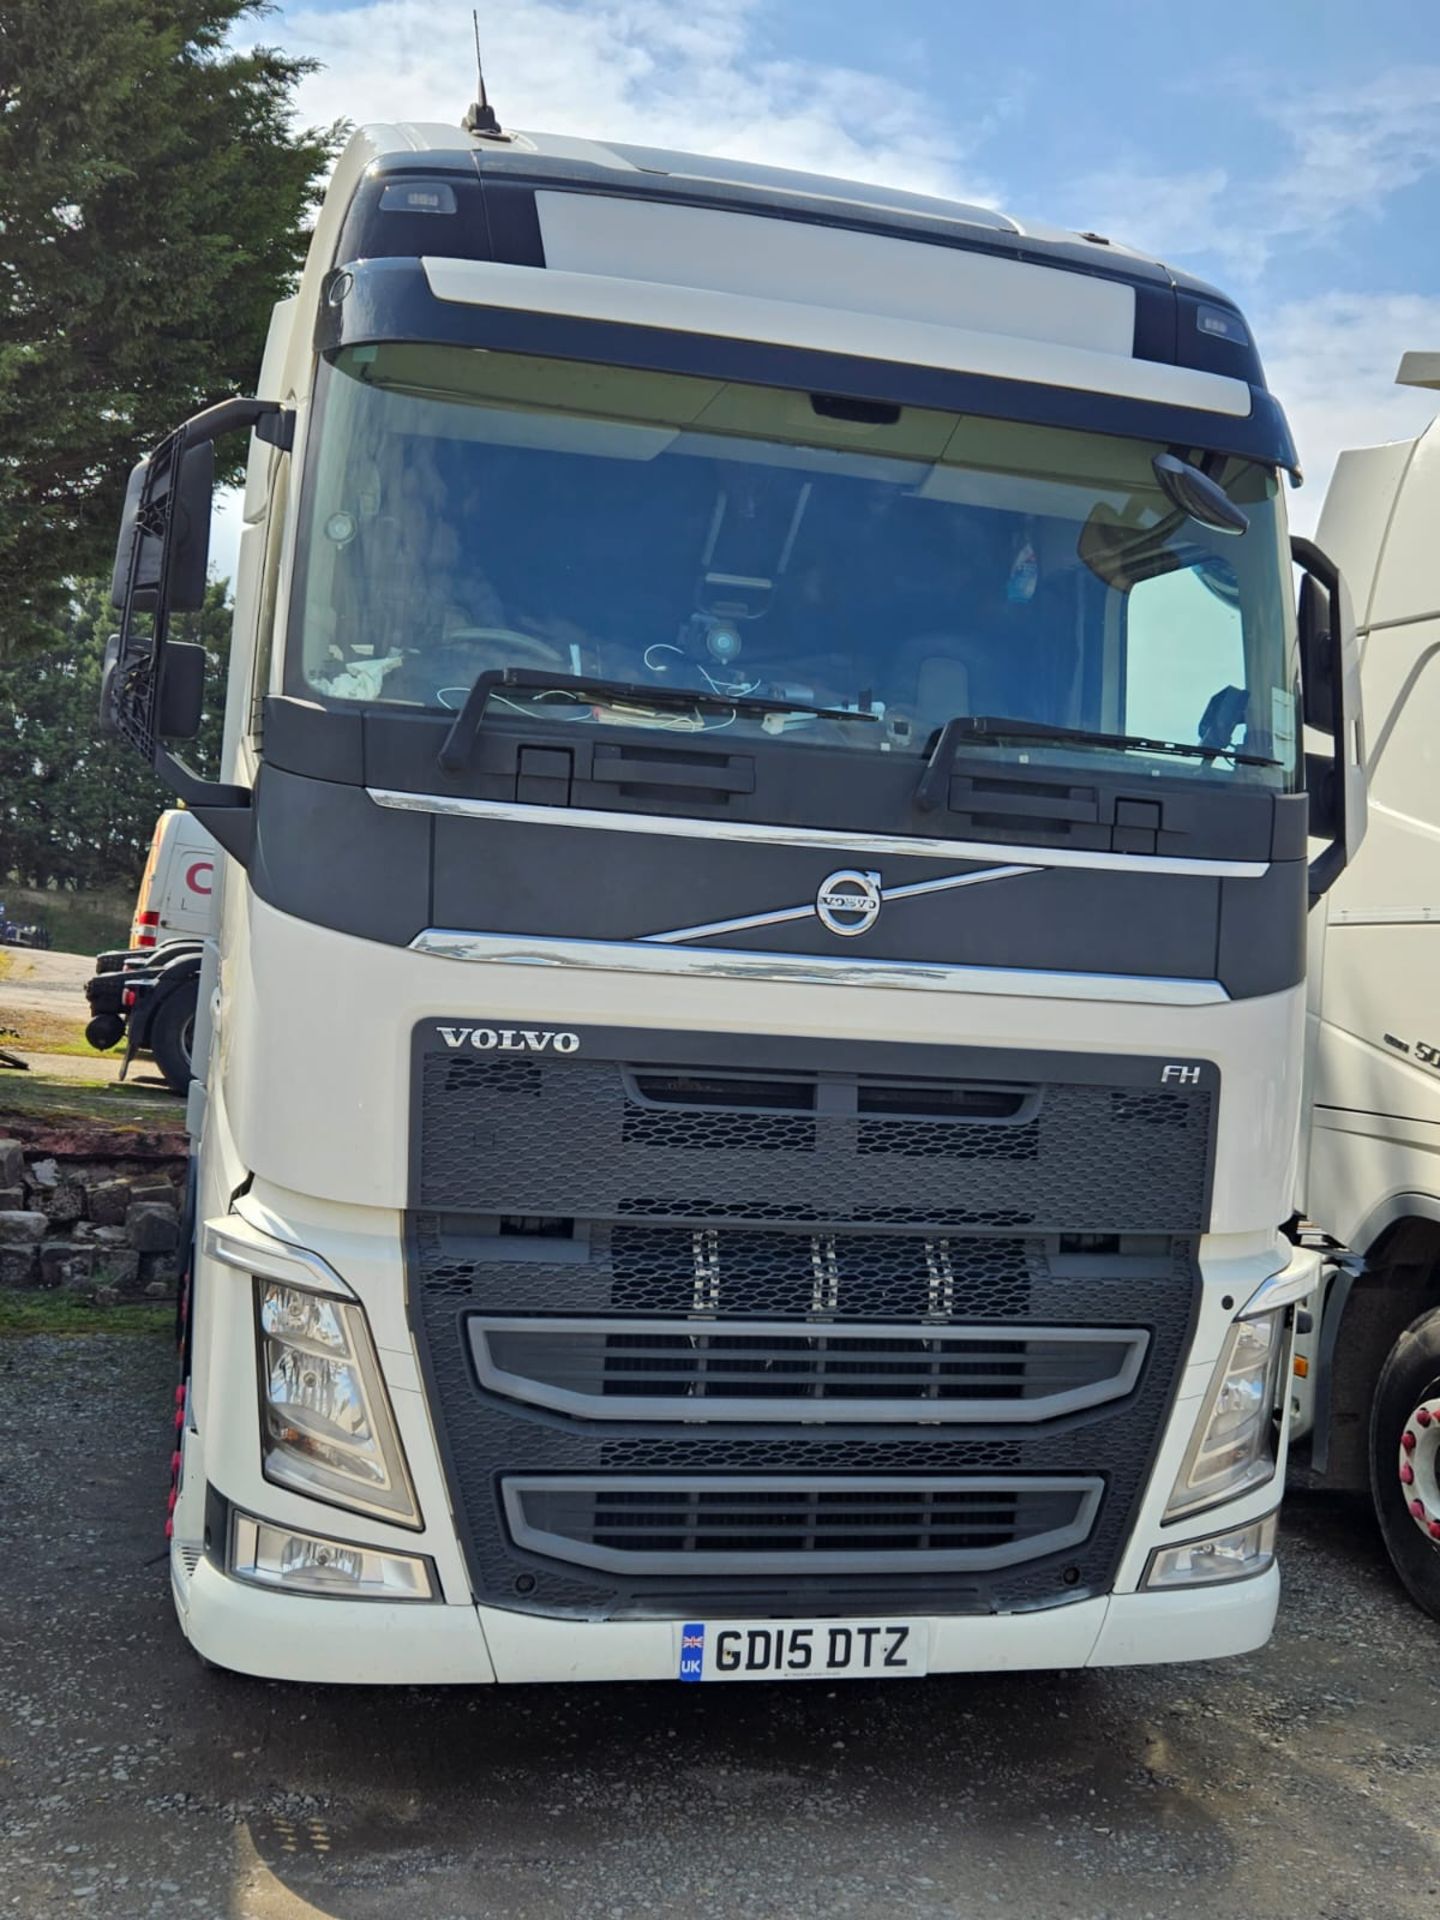 (2015) Volvo FH4 6×2 FMX500 Tractor Unit, Sleeper Cab - Image 2 of 8